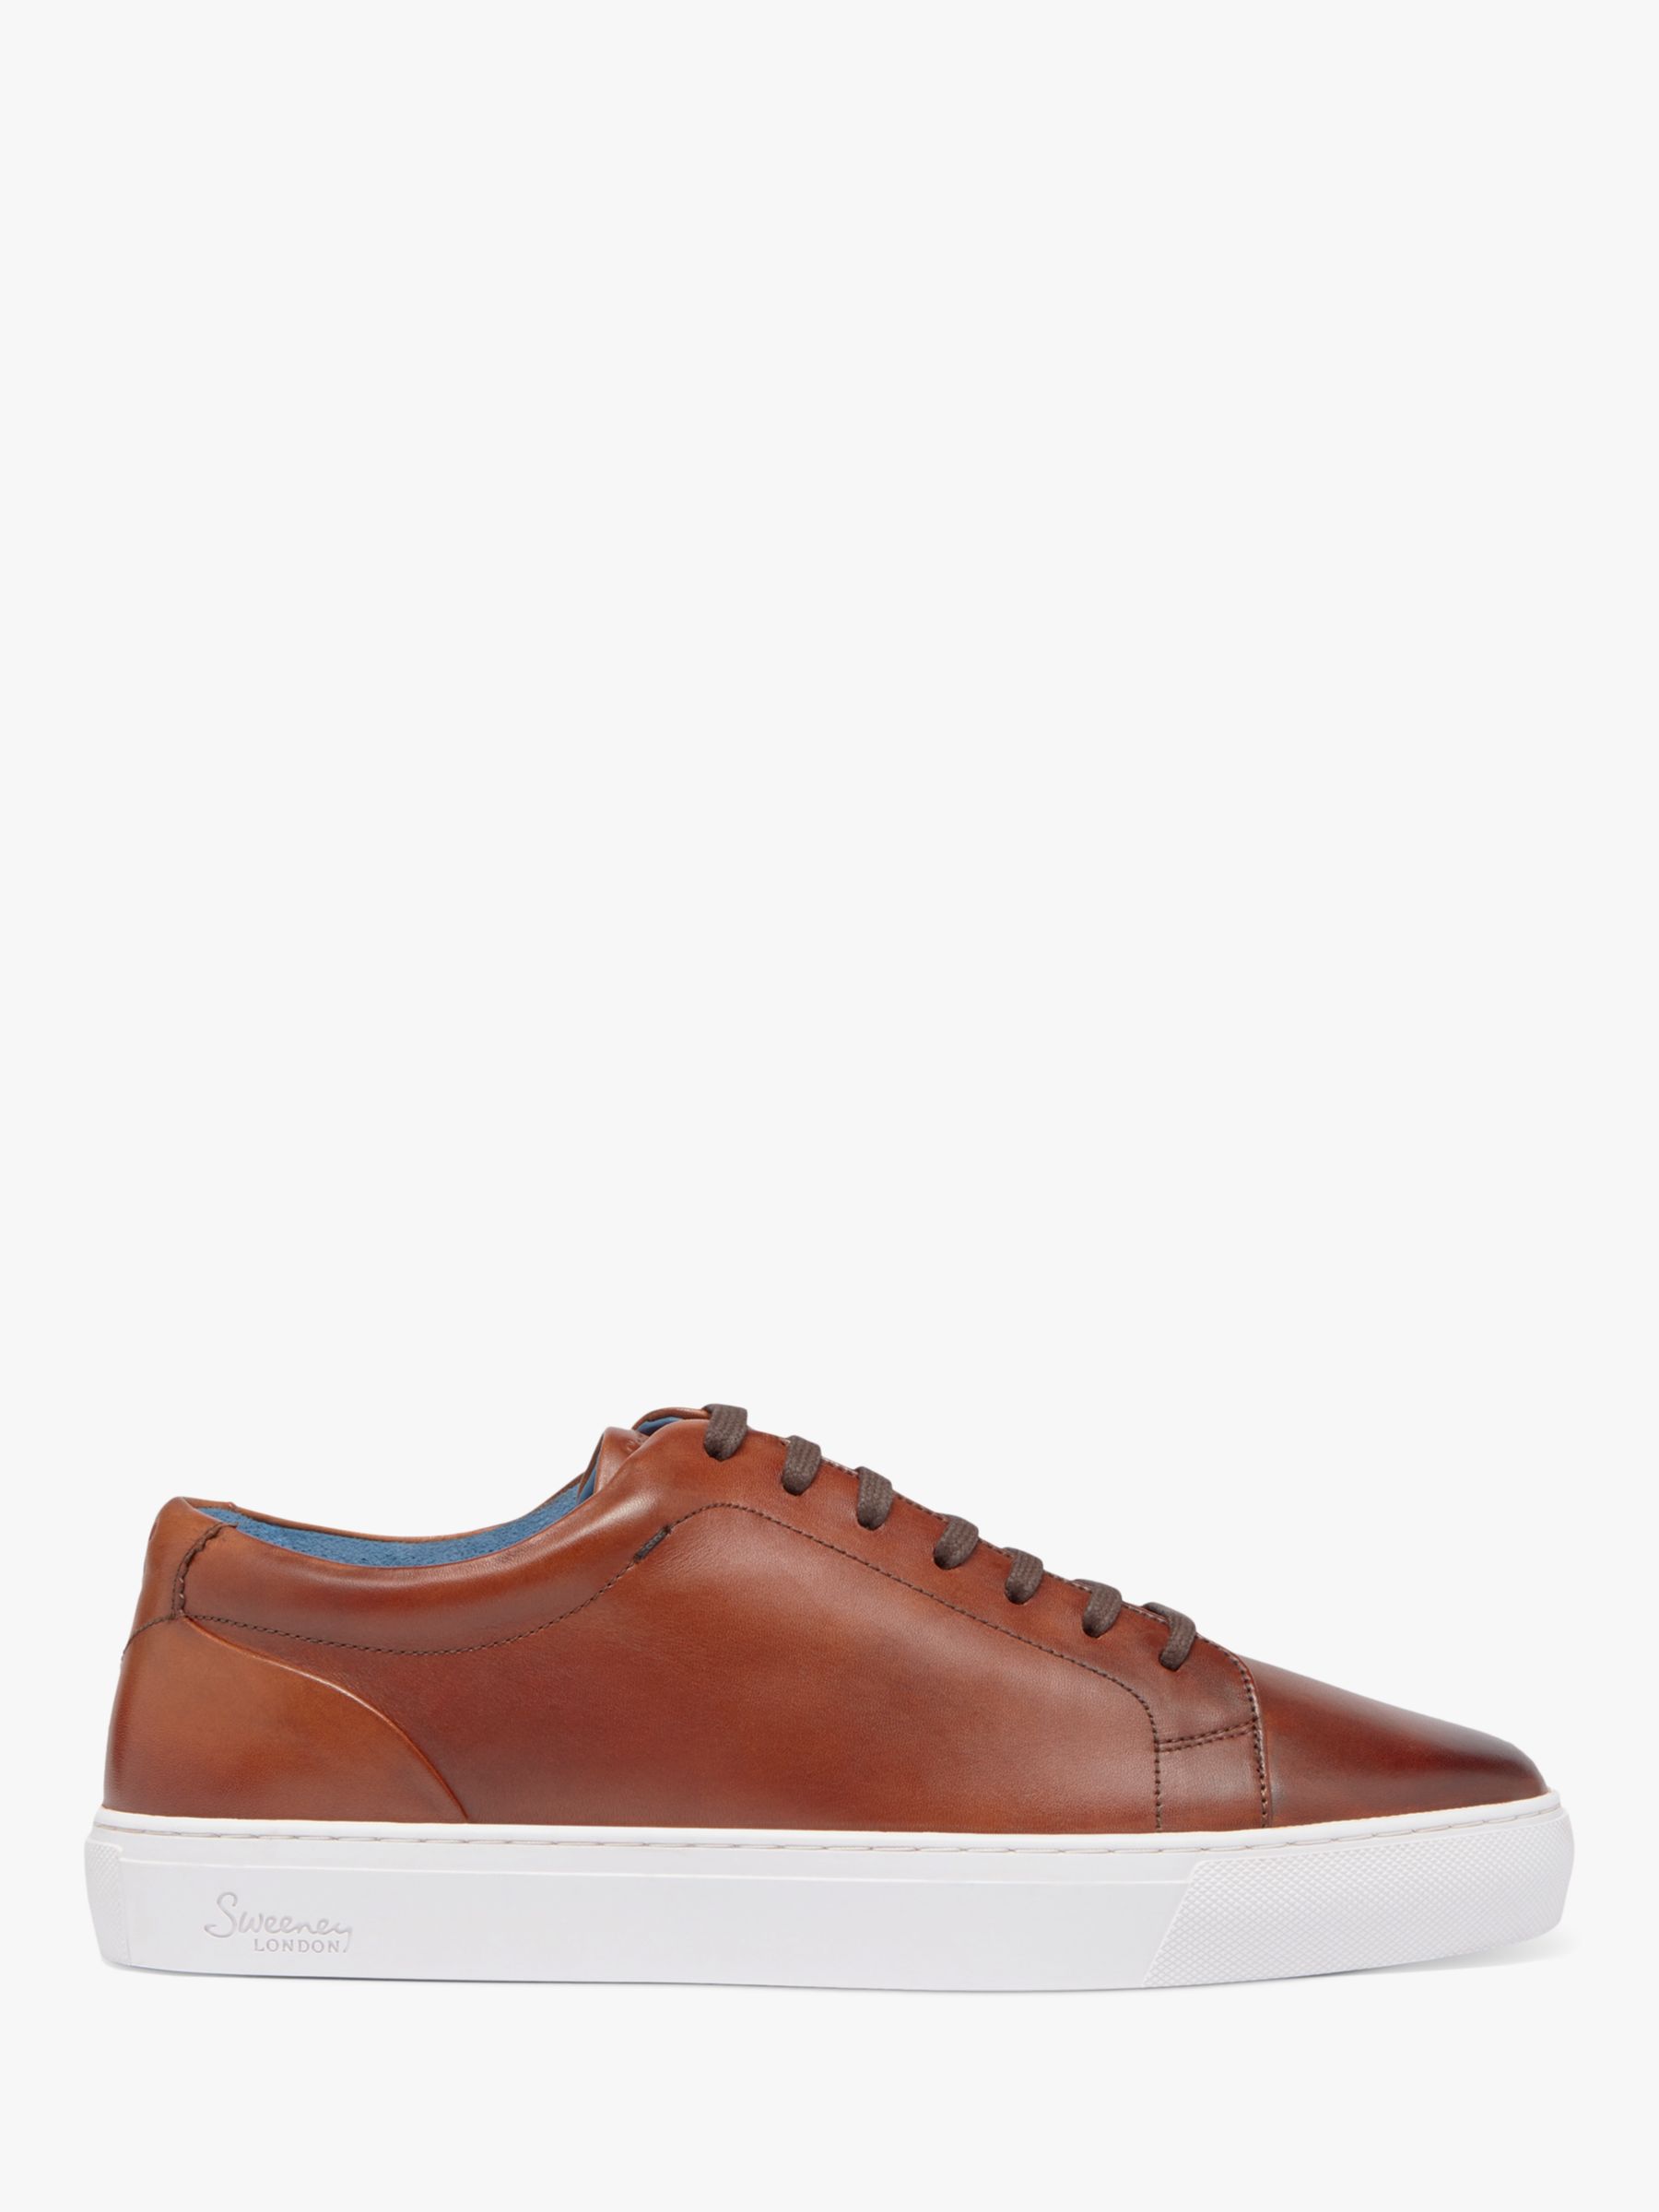 Oliver Sweeney Hayle Leather Trainers at John Lewis & Partners